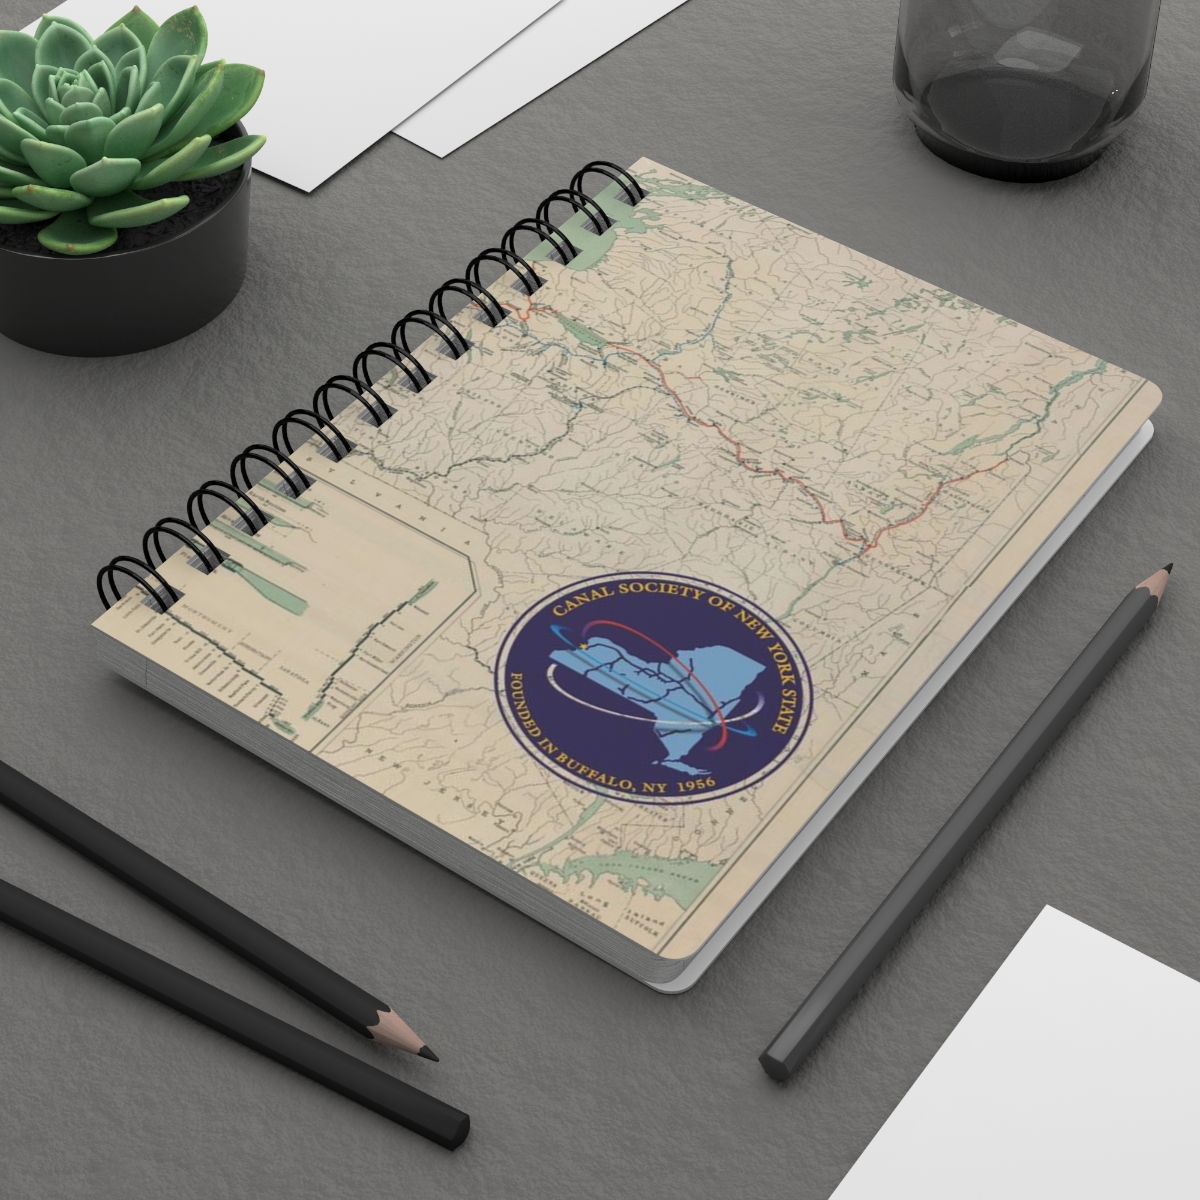 Canal Map Spiral Bound Journal product thumbnail image